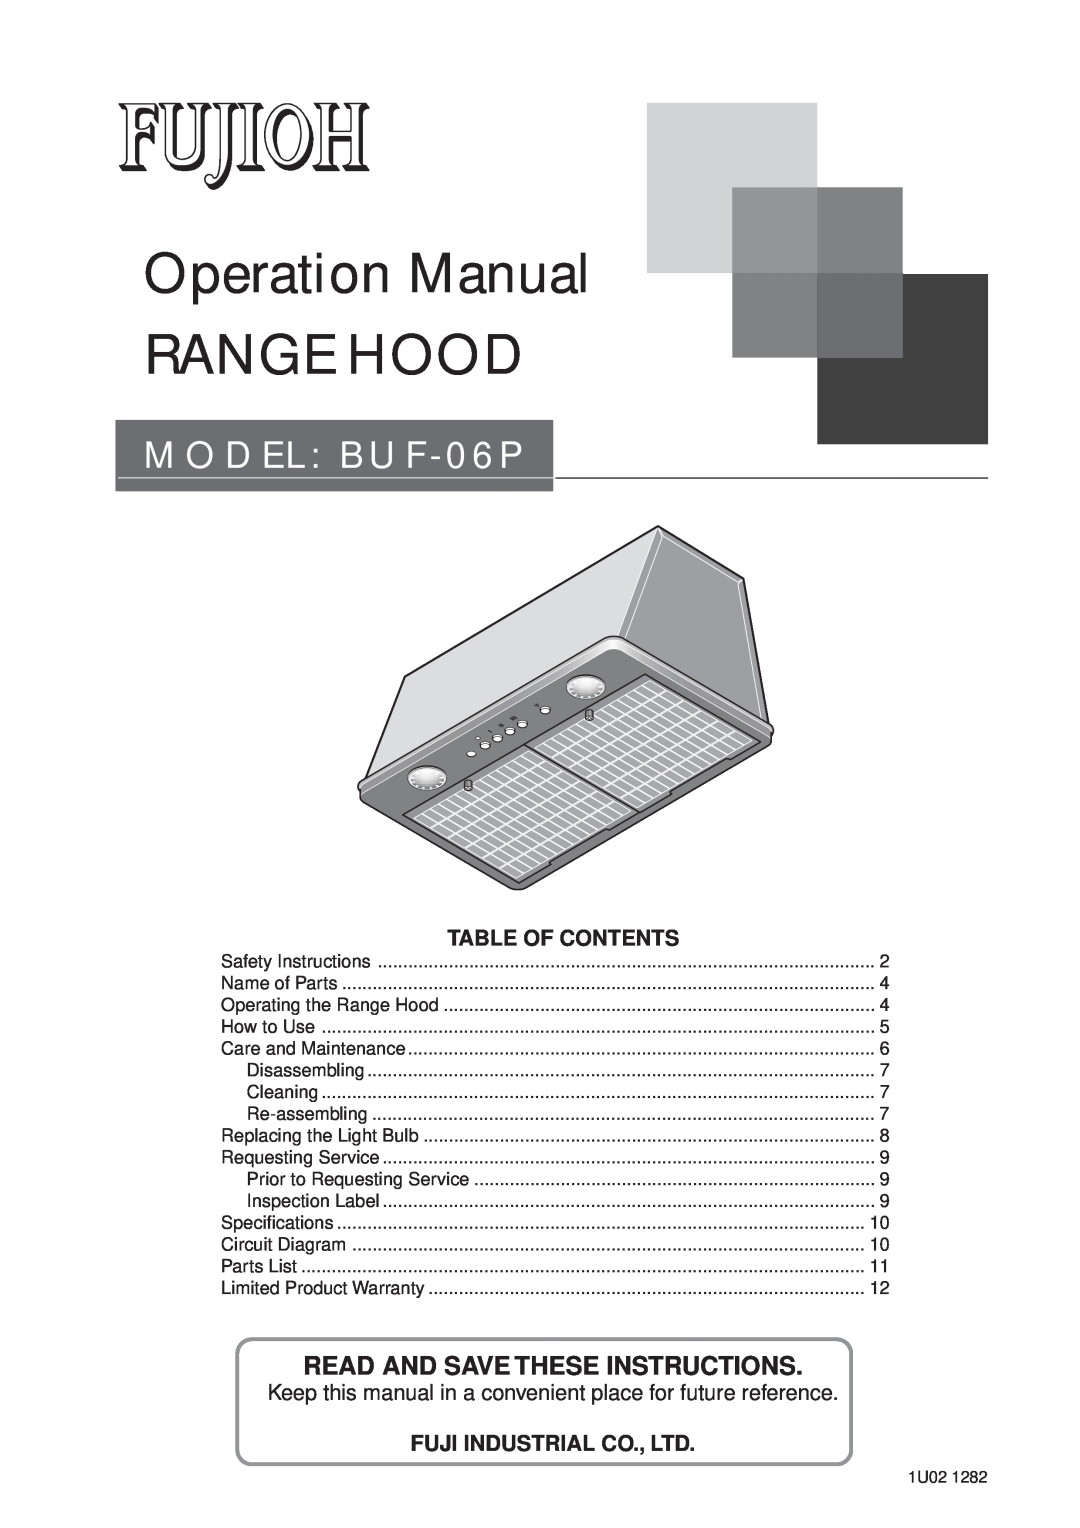 Fujioh operation manual MODEL BUF-06P, Read And Save These Instructions, Table Of Contents 